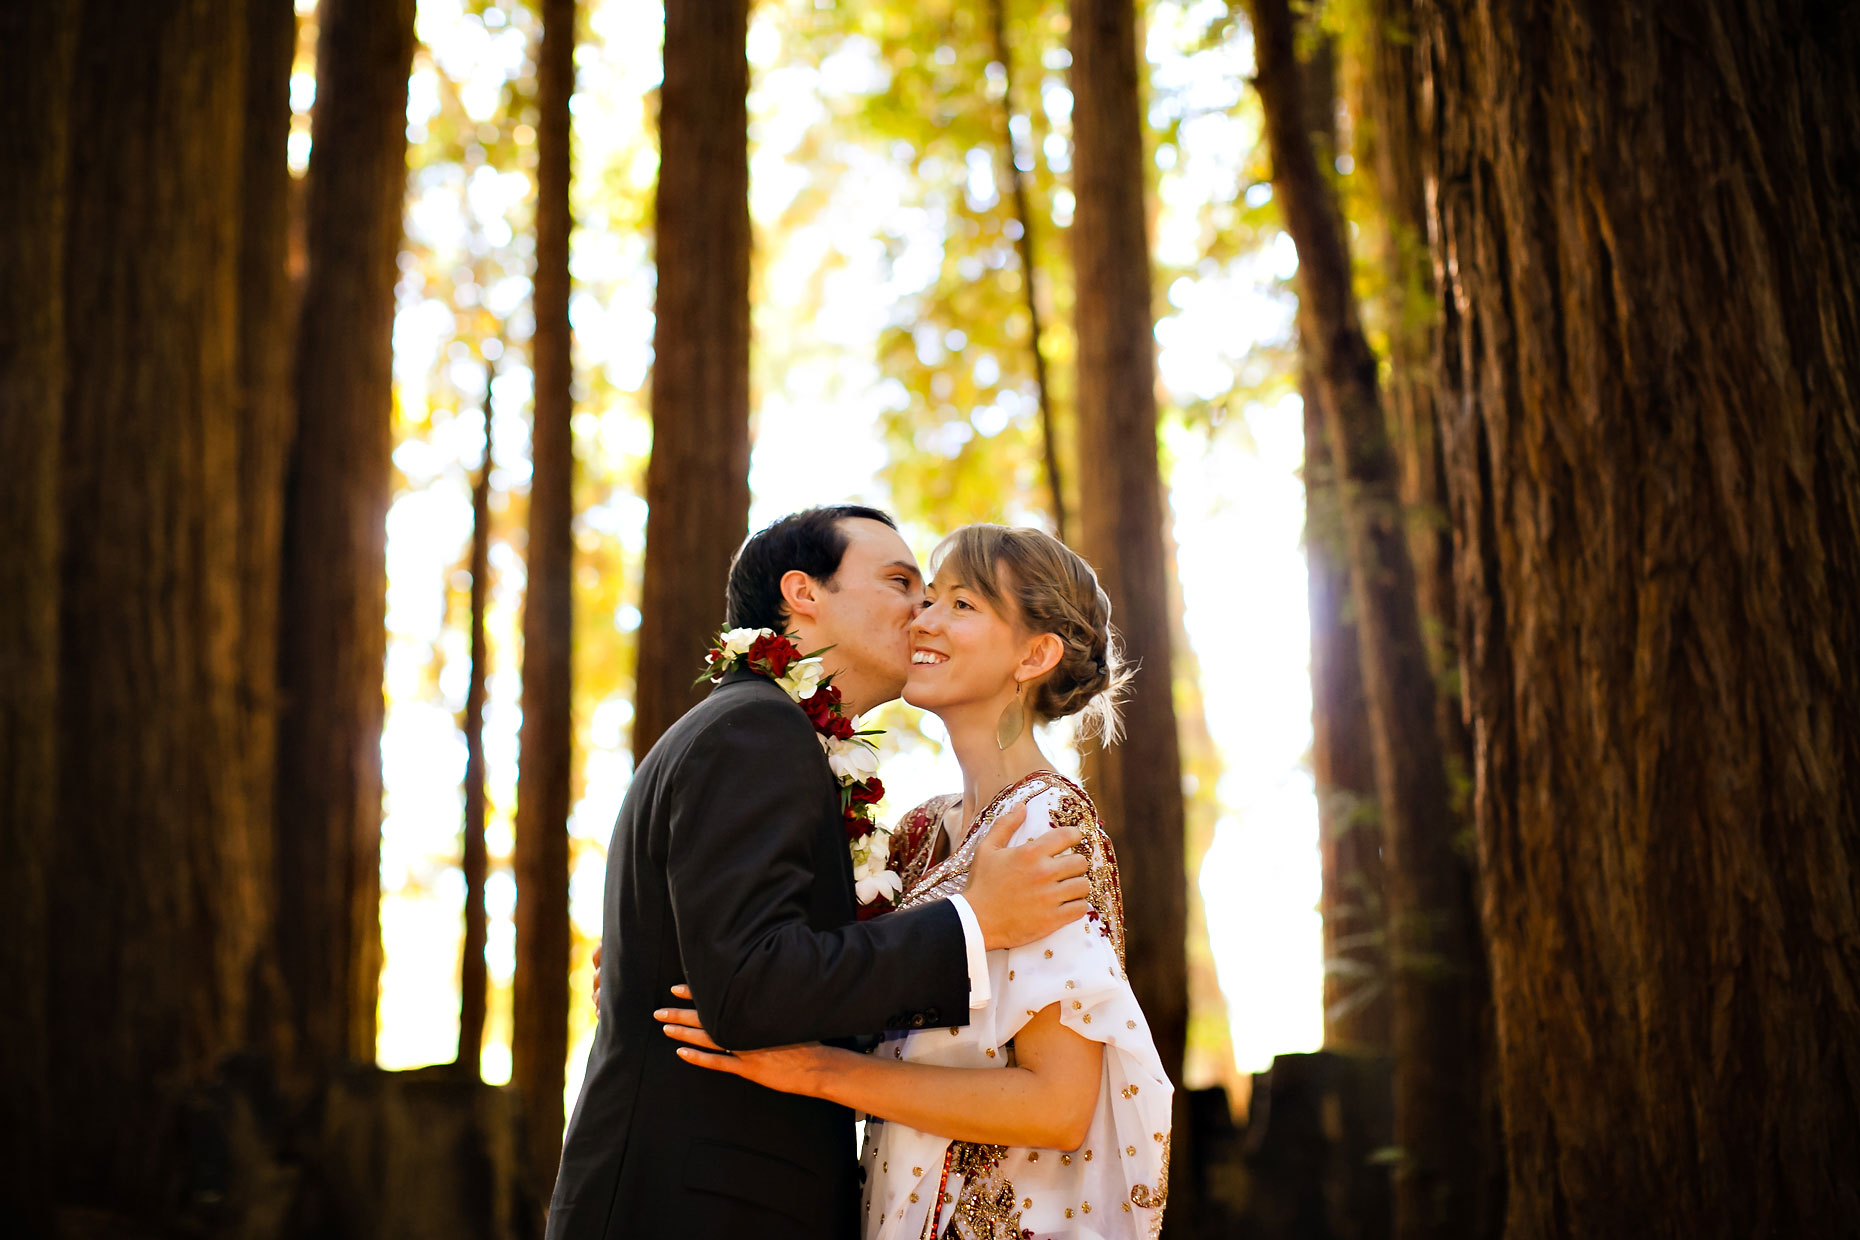 Intimate wedding in the redwoods at Big Sur.